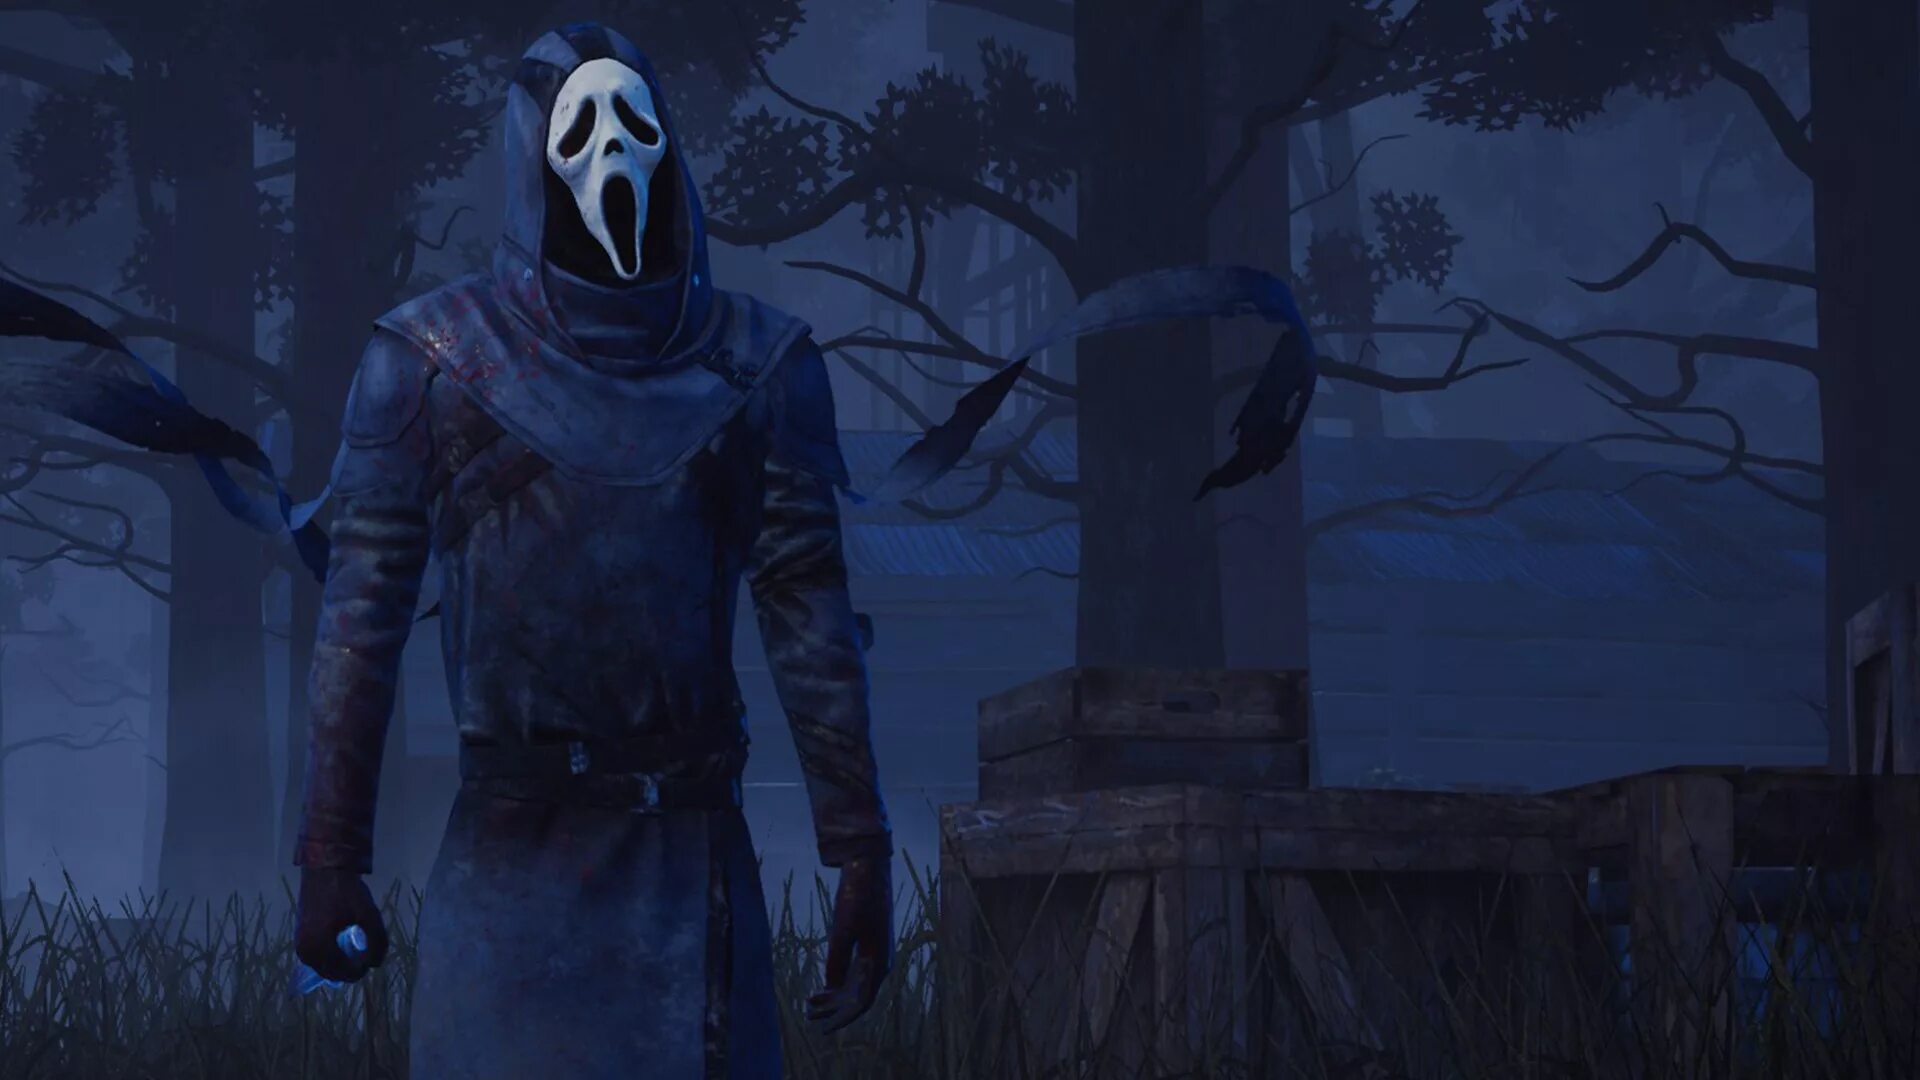 Гостфейс крик Dead by Daylight. The unknown dead by daylight